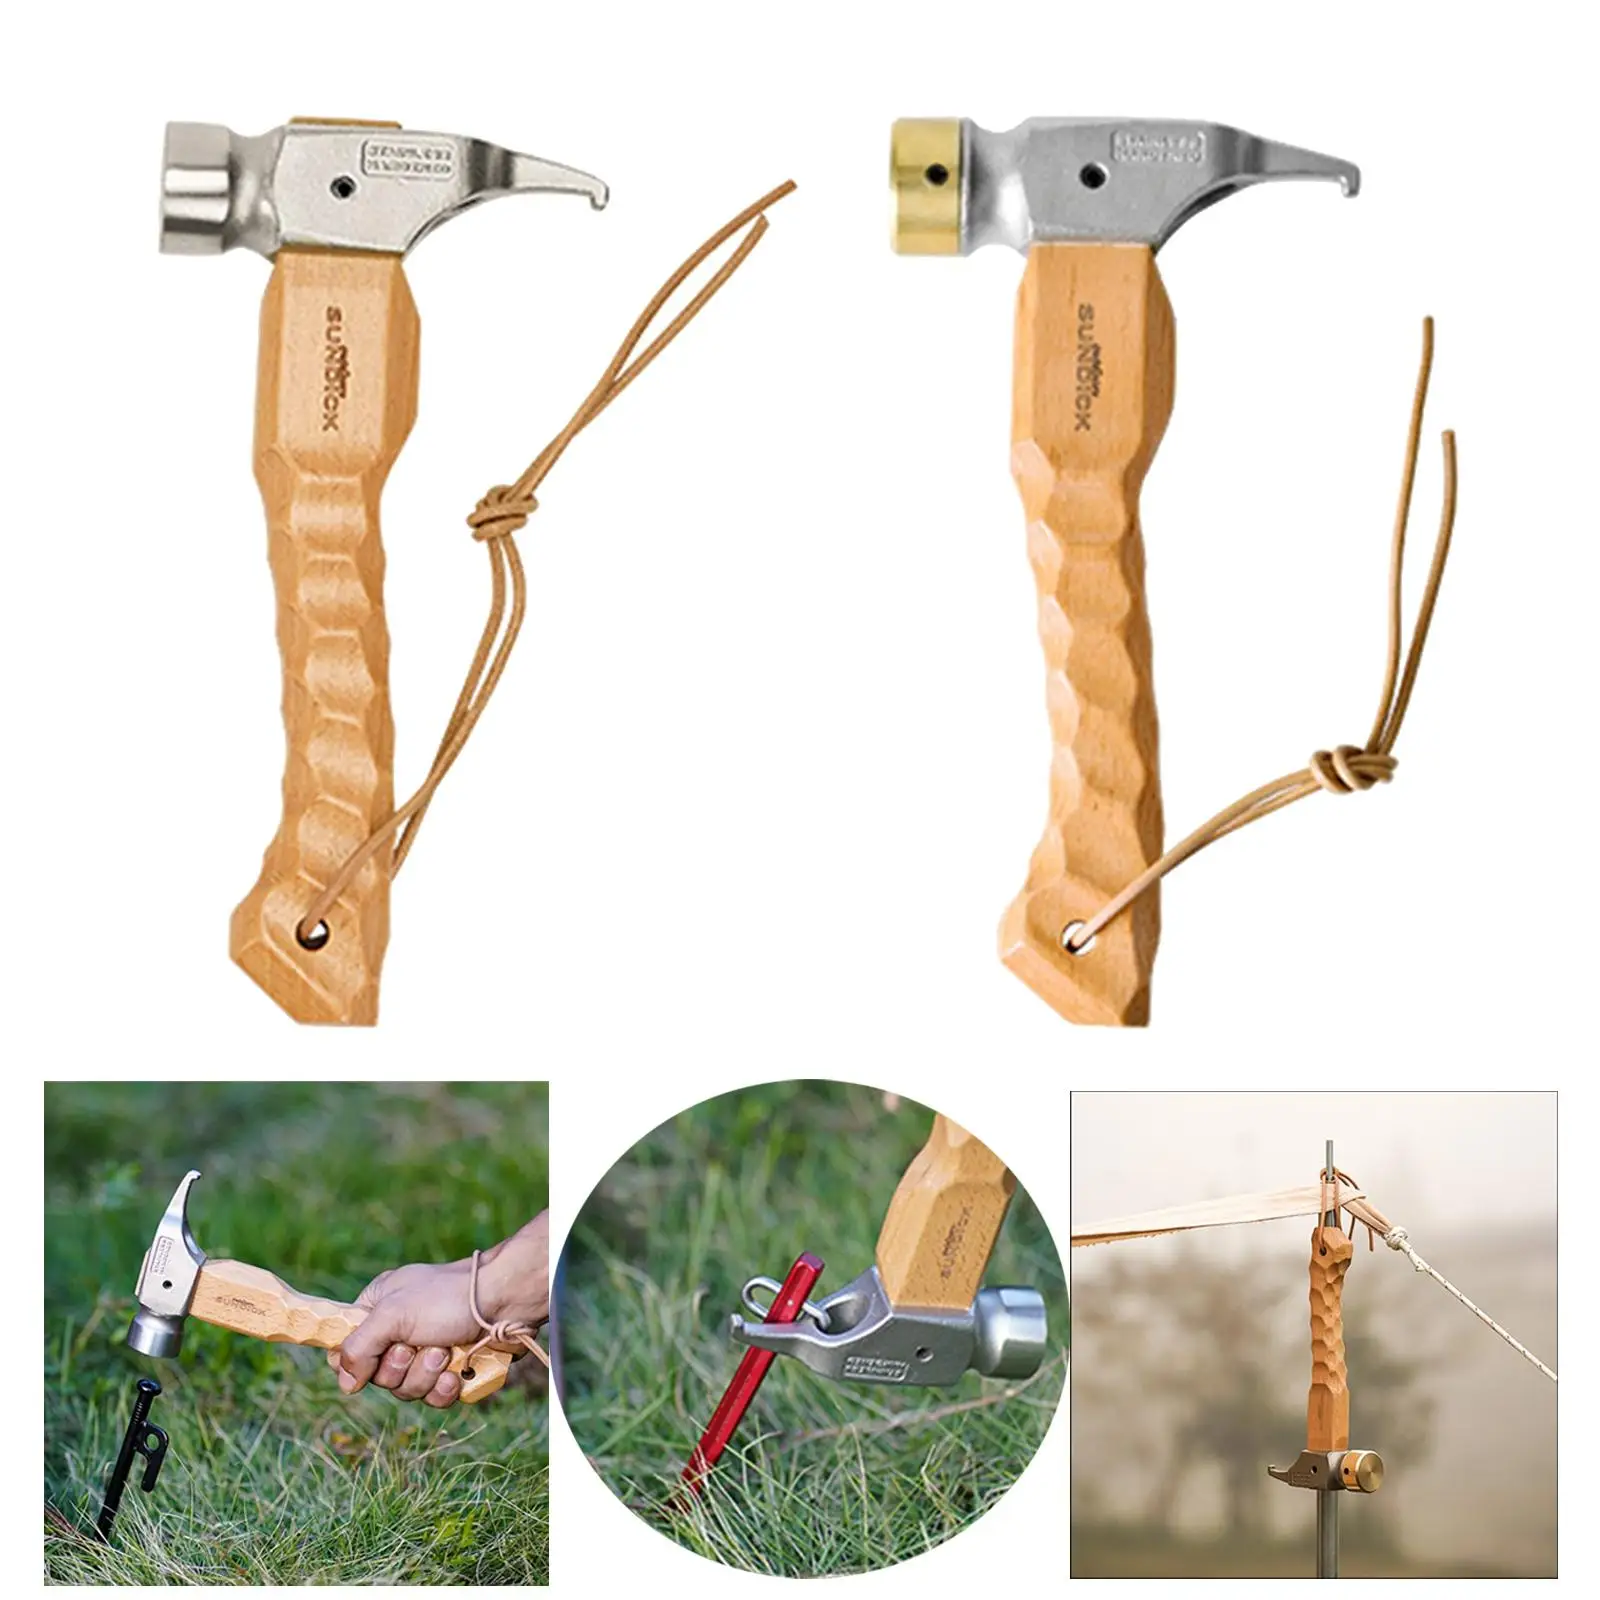 Multi-Function Portable Tent Mallet Nails Puller Hammer Lightweight Stainless Steel Camping Hiking Accessories